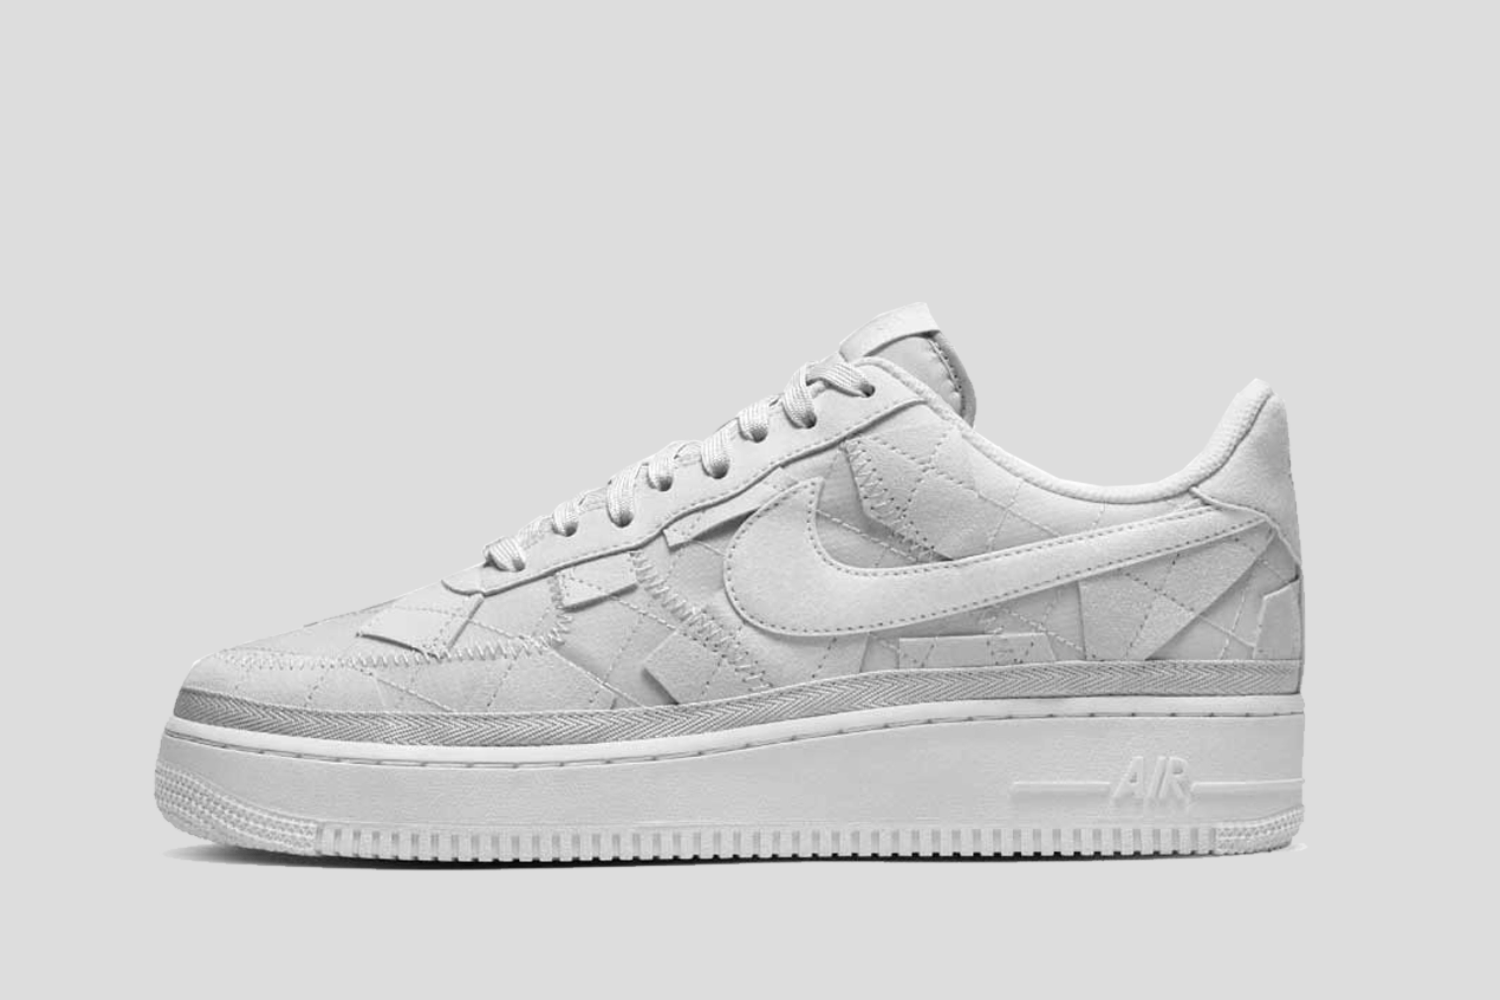 Billie Eilish x Nike Air Force 1 comes in a 'White' colorway